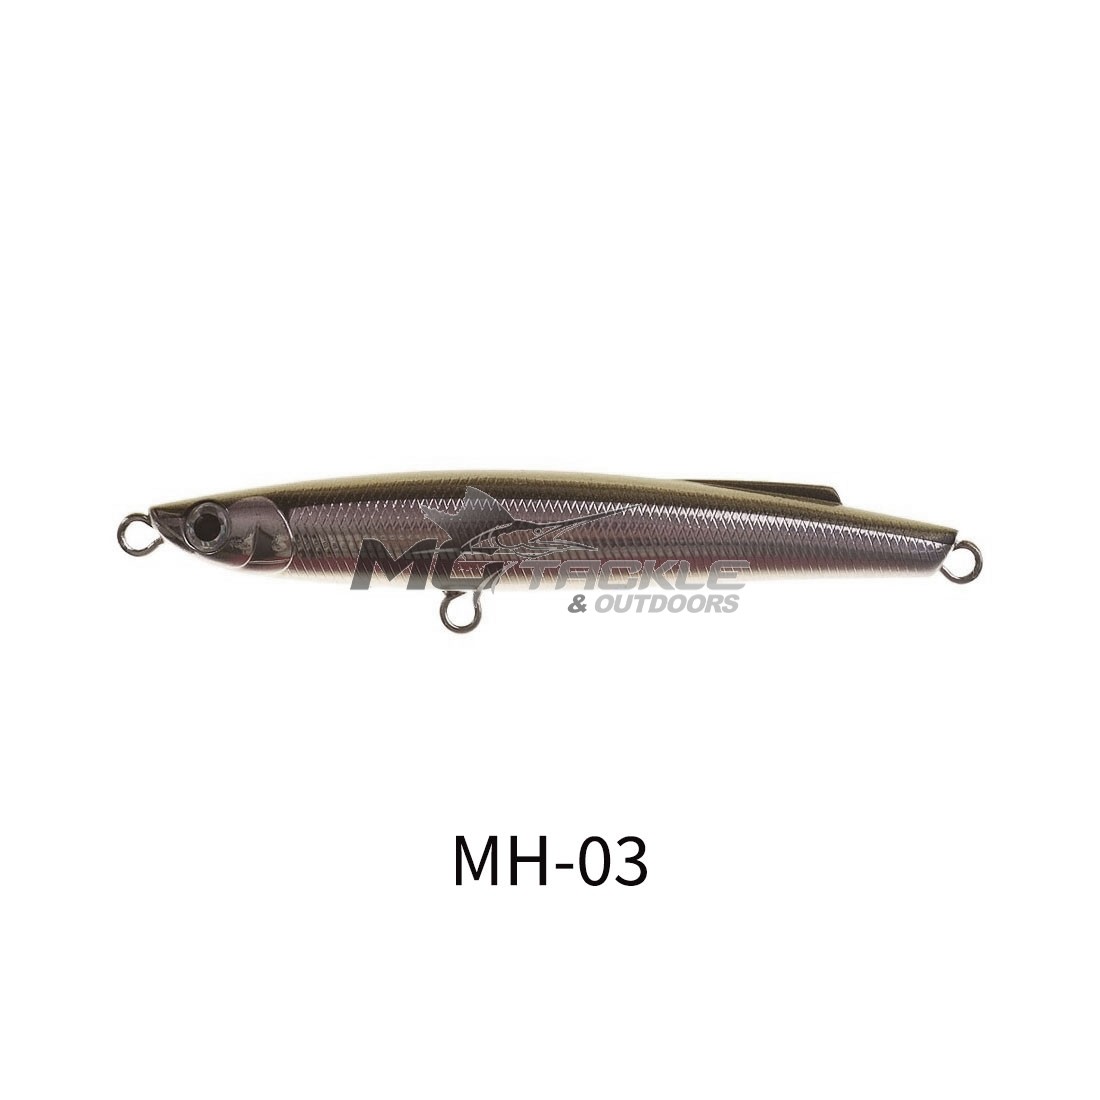 BASSDAY BUNGYCAST M-09 /100mm / 30g sinking pencil stick bait FISHING LURES